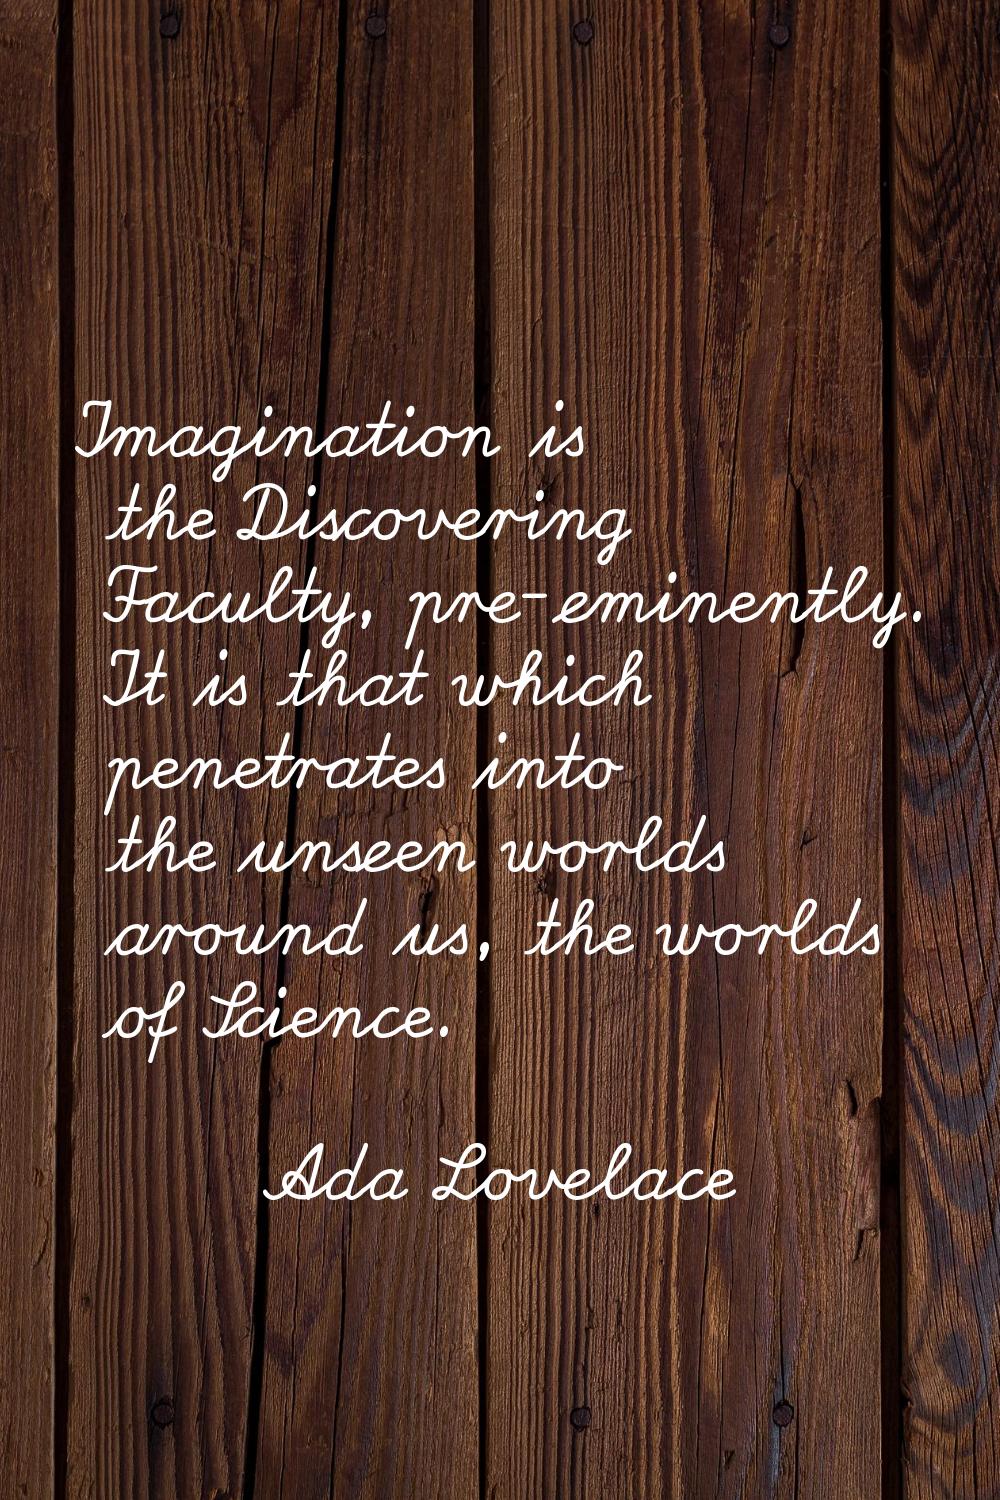 Imagination is the Discovering Faculty, pre-eminently. It is that which penetrates into the unseen 